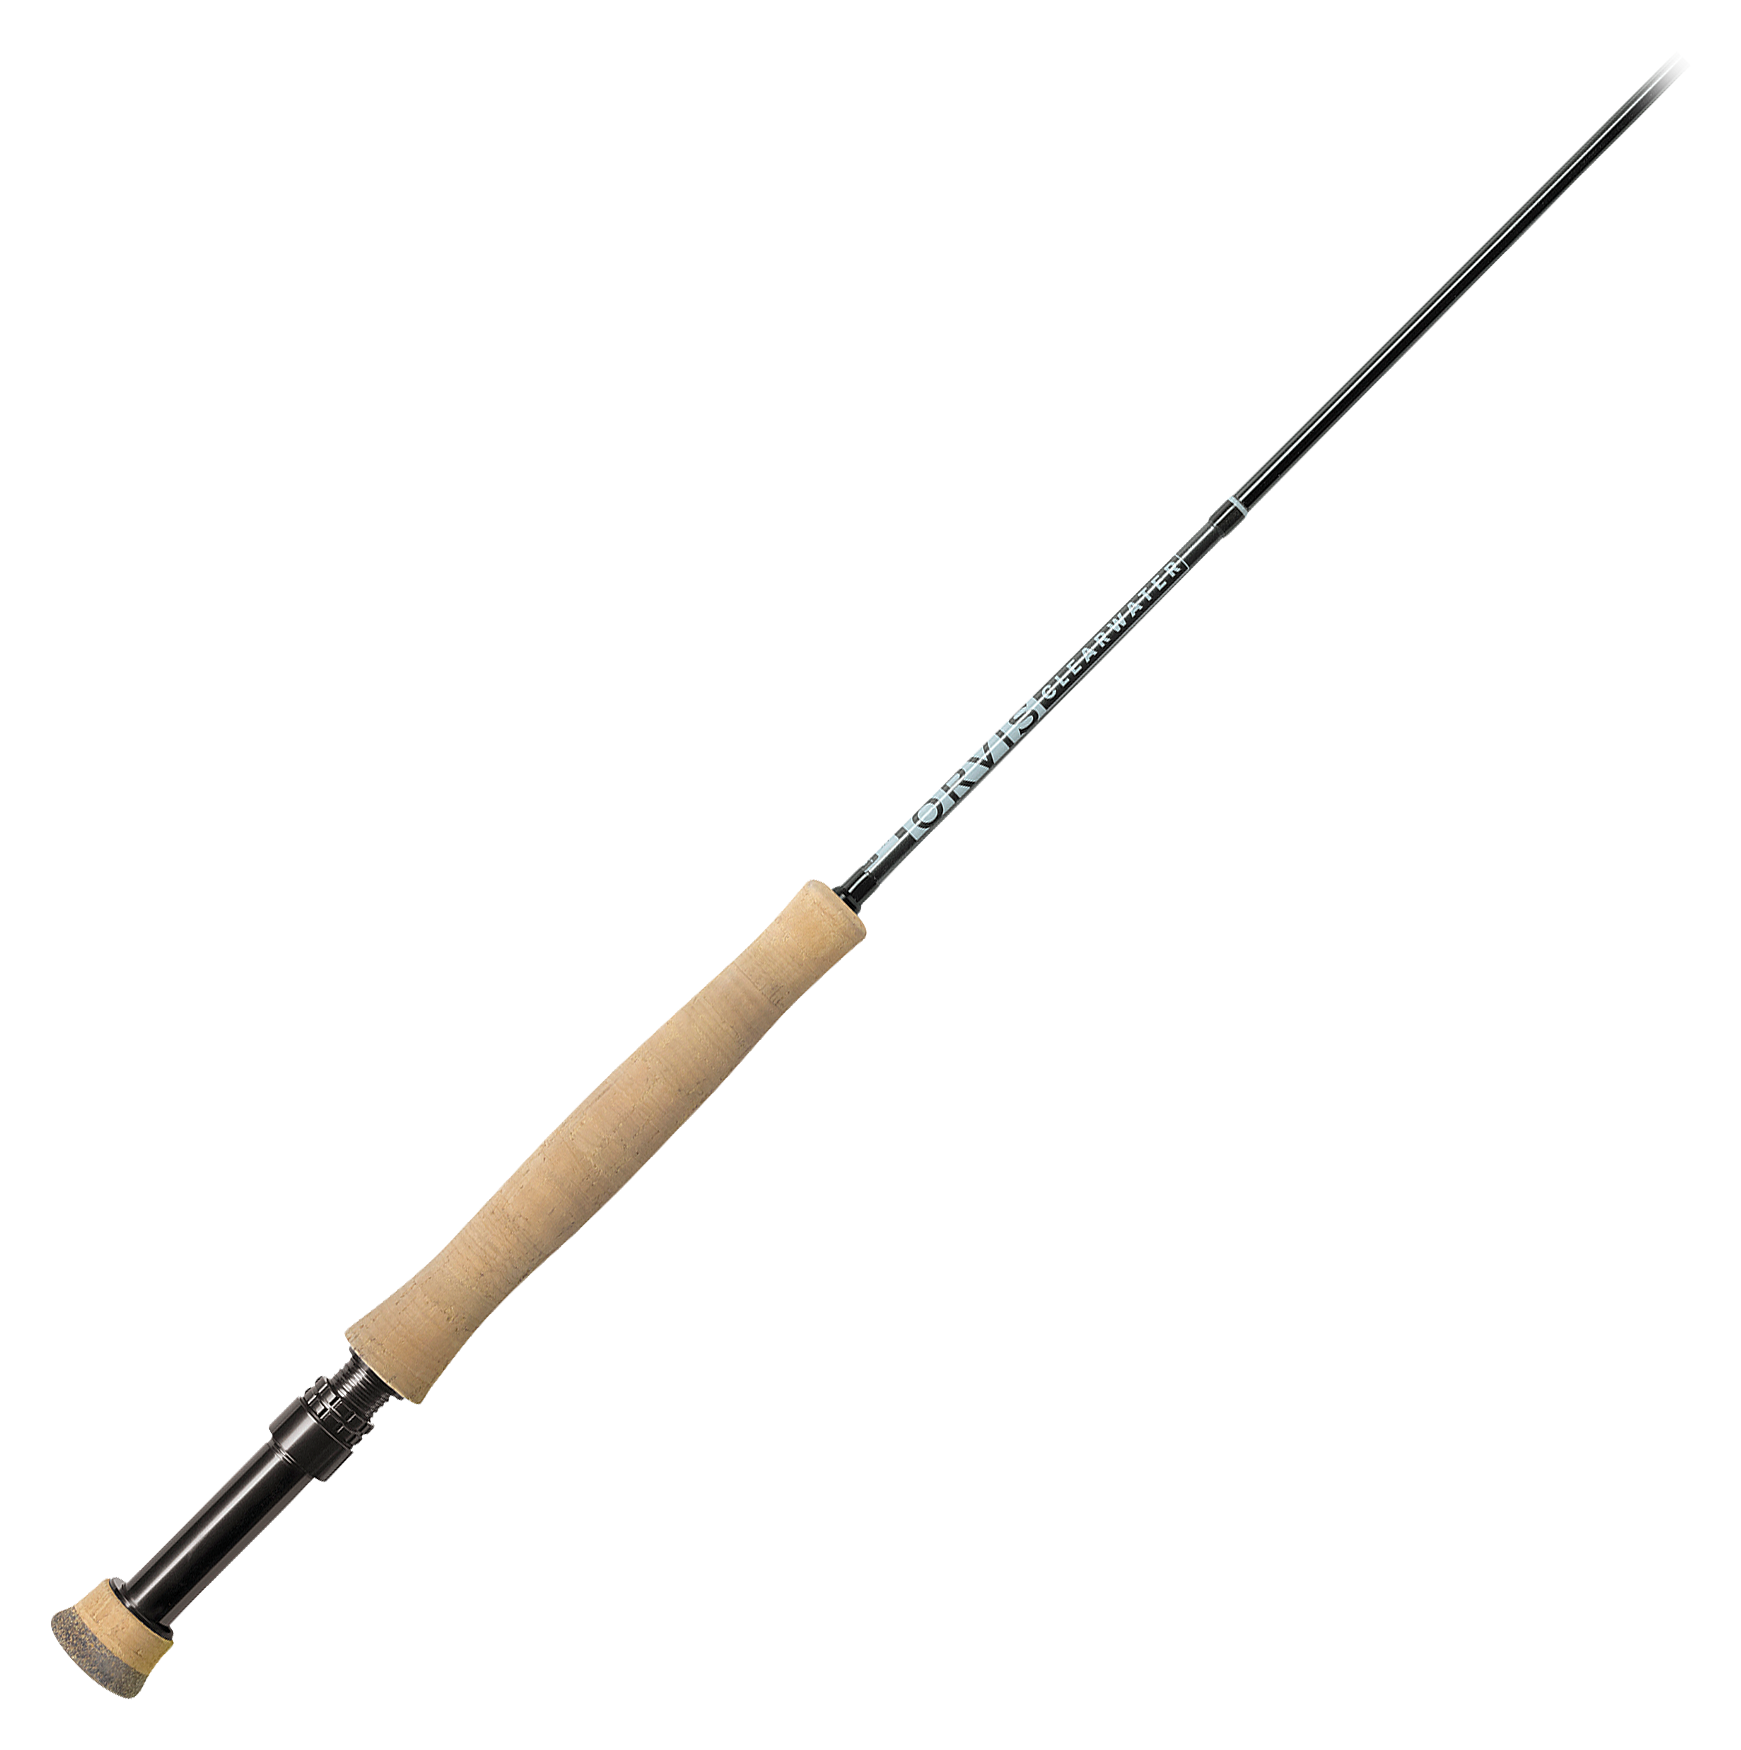 Orvis Clearwater 6-Piece Fly Rod - 8'6